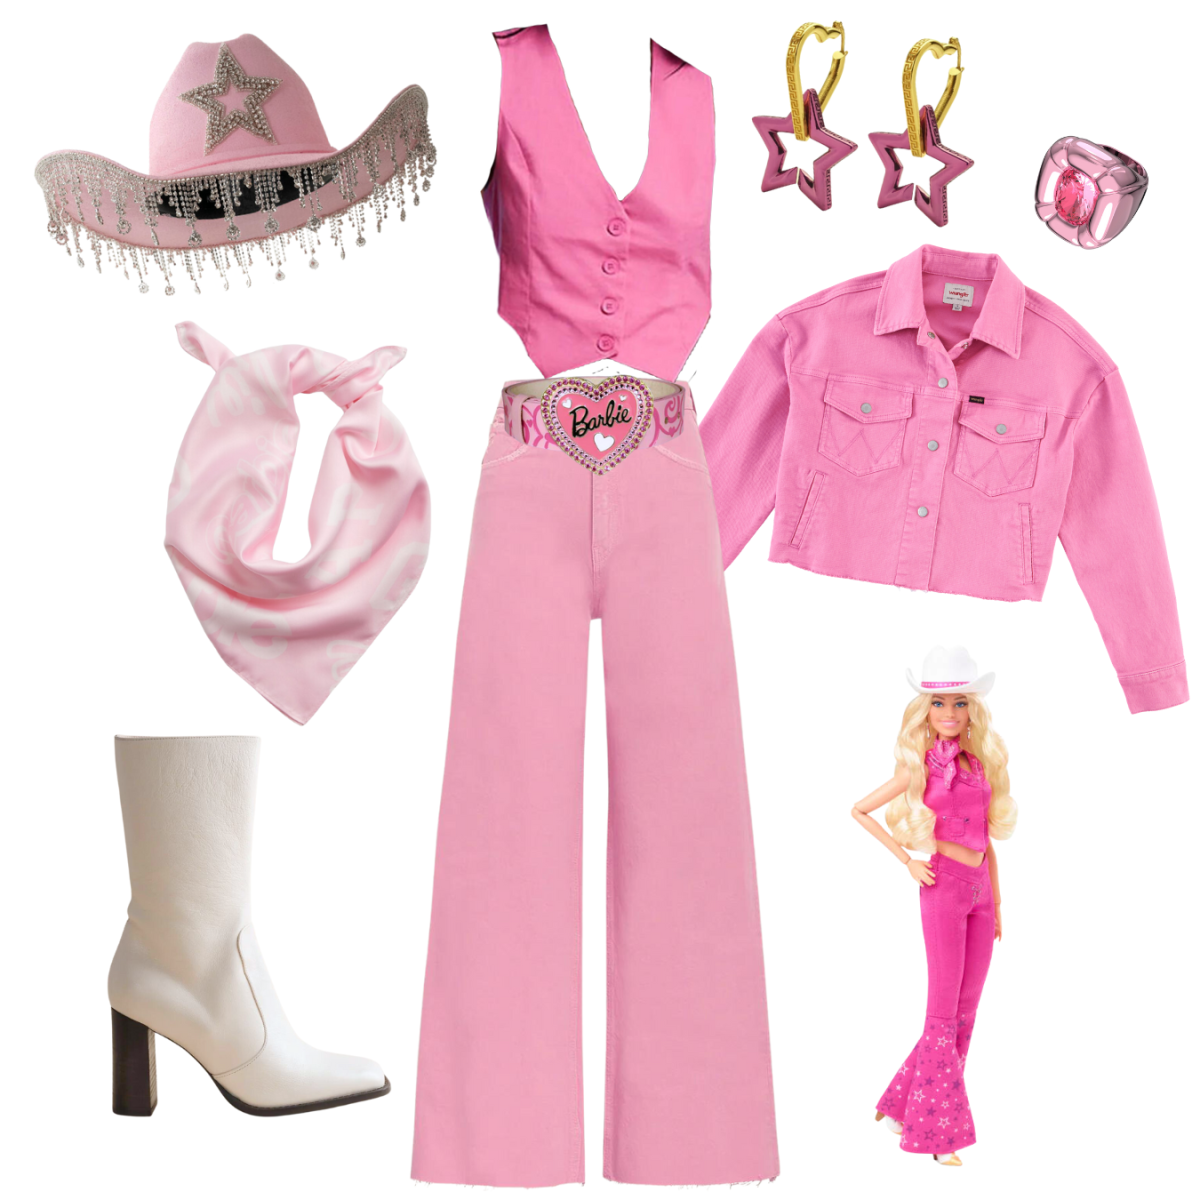 Barbie outfits: Everything you need to dress up for the cinema